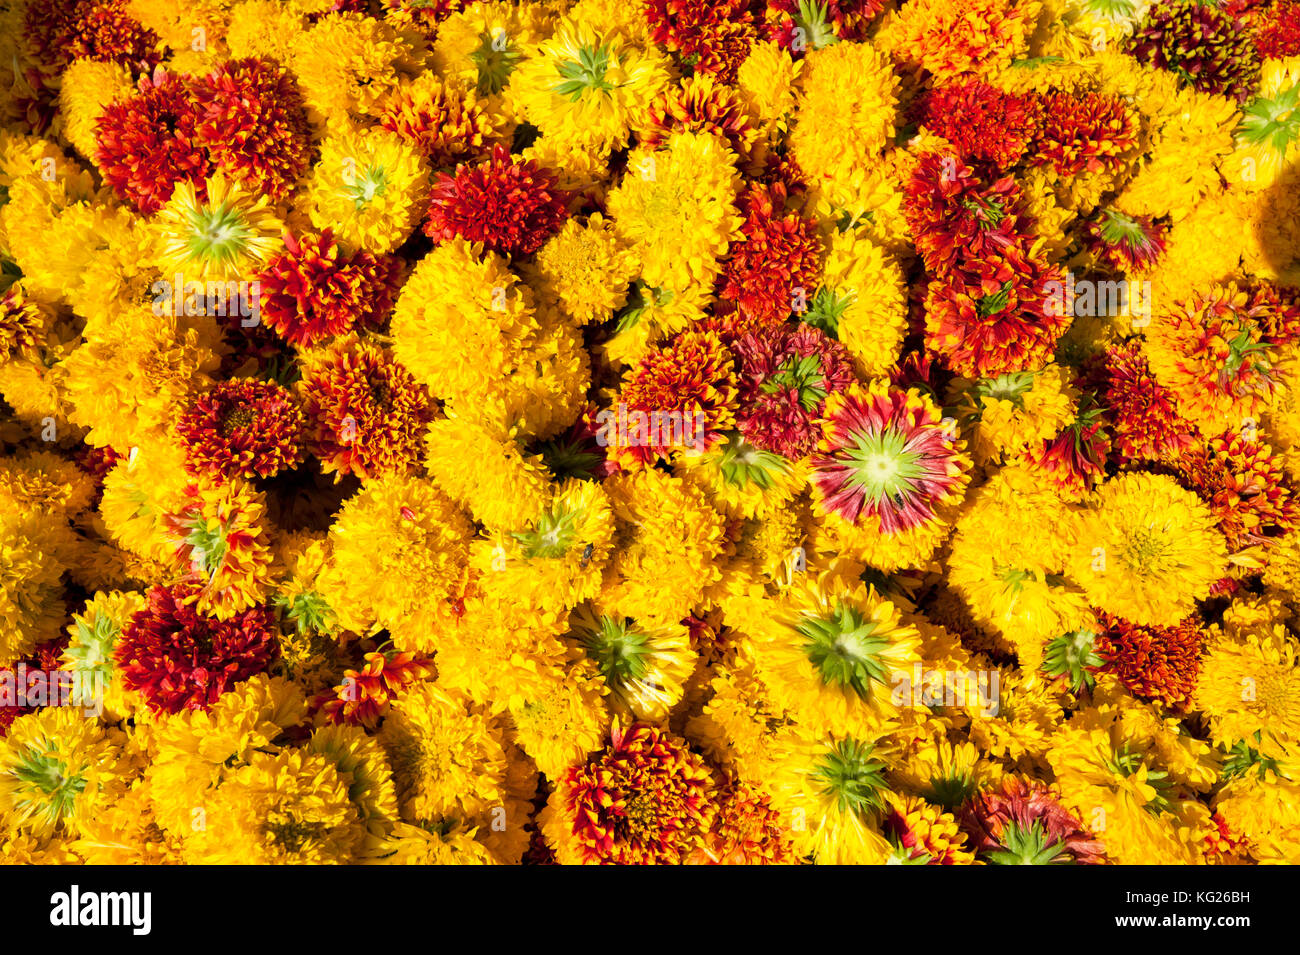 Cut yellow marigolds for sale in the early morning flower market, Jaipur, Rajasthan, India, Asia Stock Photo